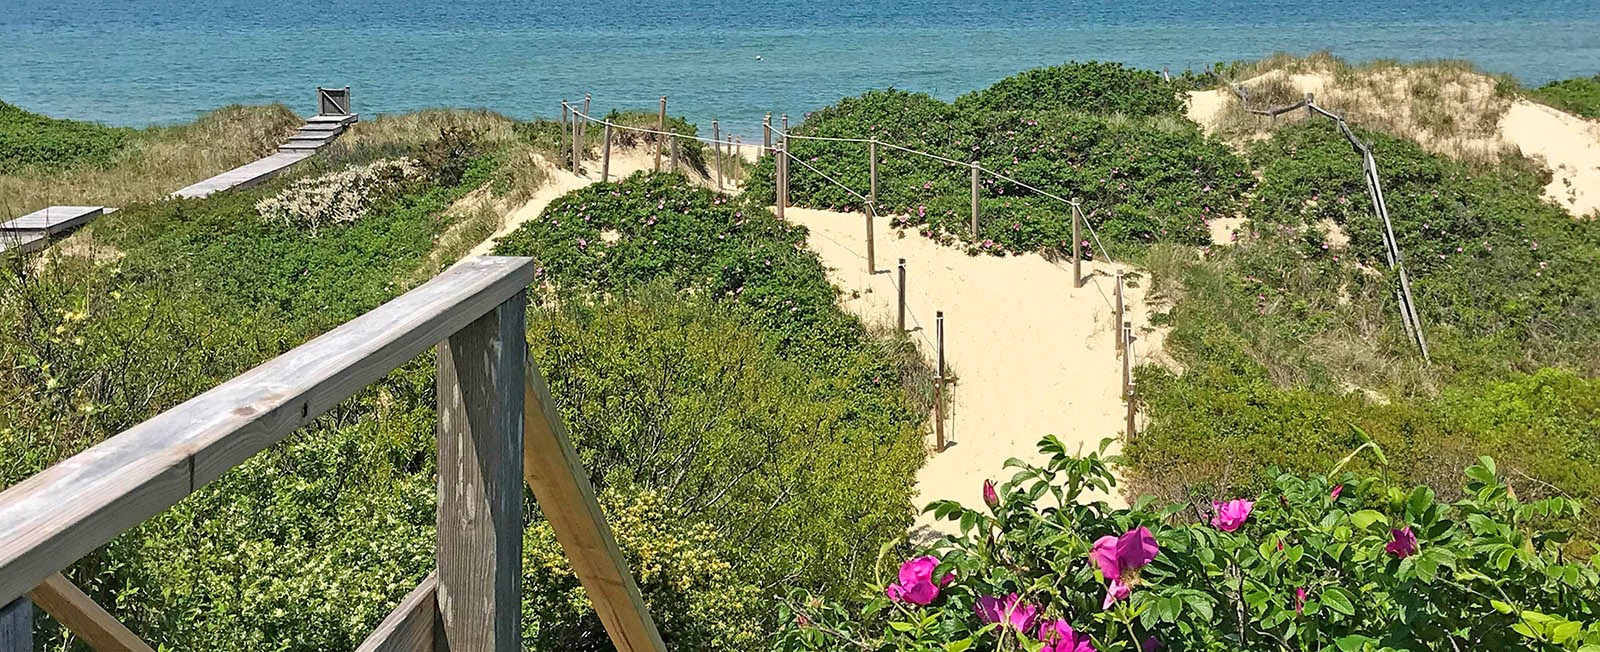 Don't miss these spots when you spend a day on Nantucket!